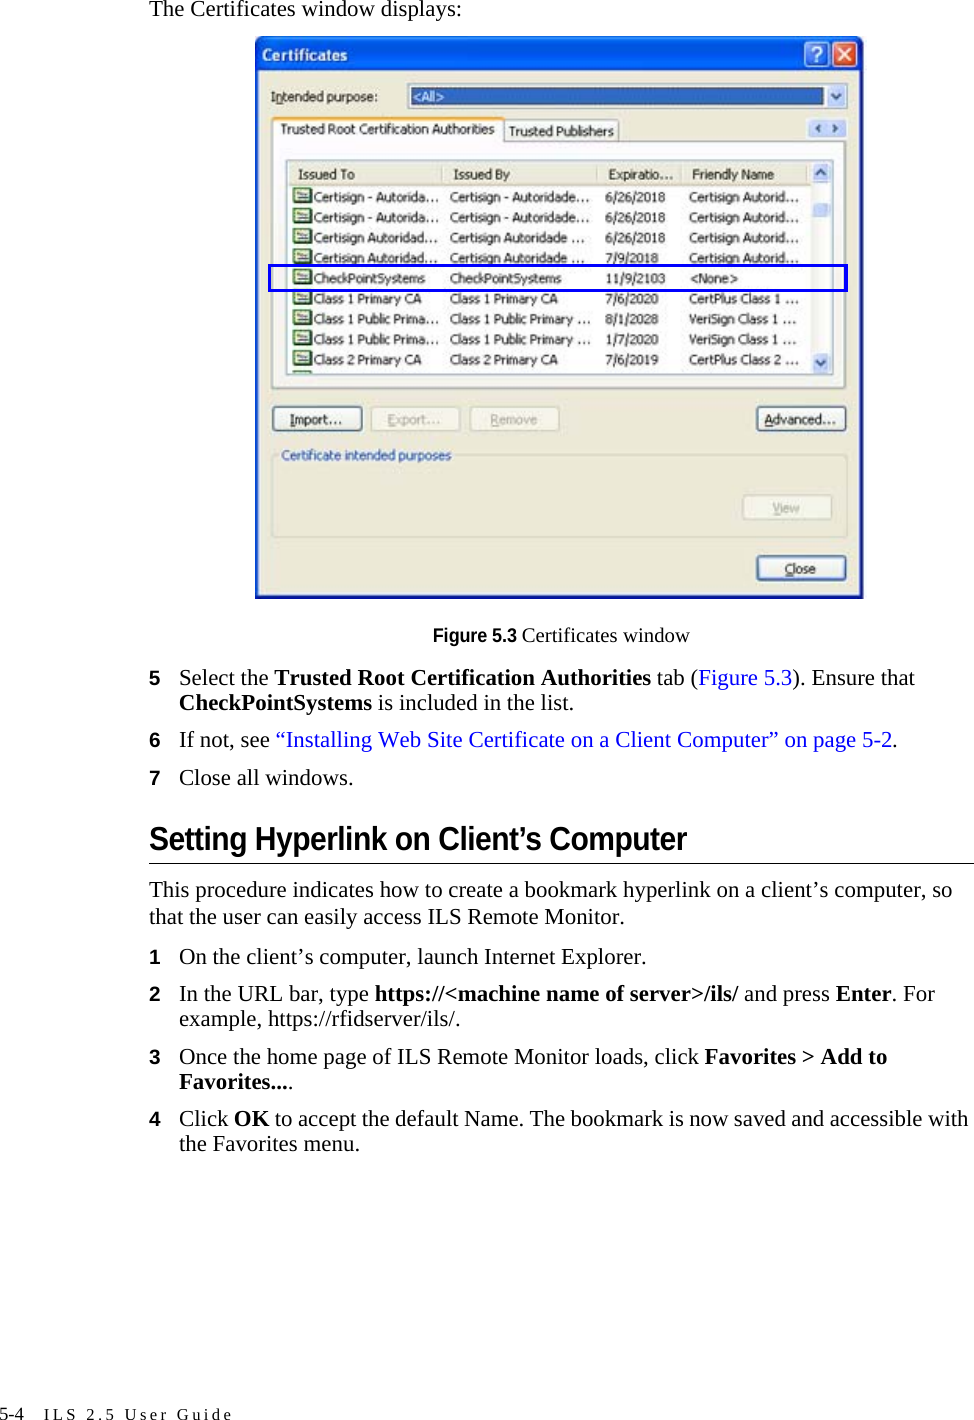 5-4 ILS 2.5 User GuideThe Certificates window displays:Figure 5.3 Certificates window5Select the Trusted Root Certification Authorities tab (Figure 5.3). Ensure that CheckPointSystems is included in the list.6If not, see “Installing Web Site Certificate on a Client Computer” on page 5-2. 7Close all windows.Setting Hyperlink on Client’s ComputerThis procedure indicates how to create a bookmark hyperlink on a client’s computer, so that the user can easily access ILS Remote Monitor.1On the client’s computer, launch Internet Explorer.2In the URL bar, type https://&lt;machine name of server&gt;/ils/ and press Enter. For example, https://rfidserver/ils/.3Once the home page of ILS Remote Monitor loads, click Favorites &gt; Add to Favorites....4Click OK to accept the default Name. The bookmark is now saved and accessible with the Favorites menu.